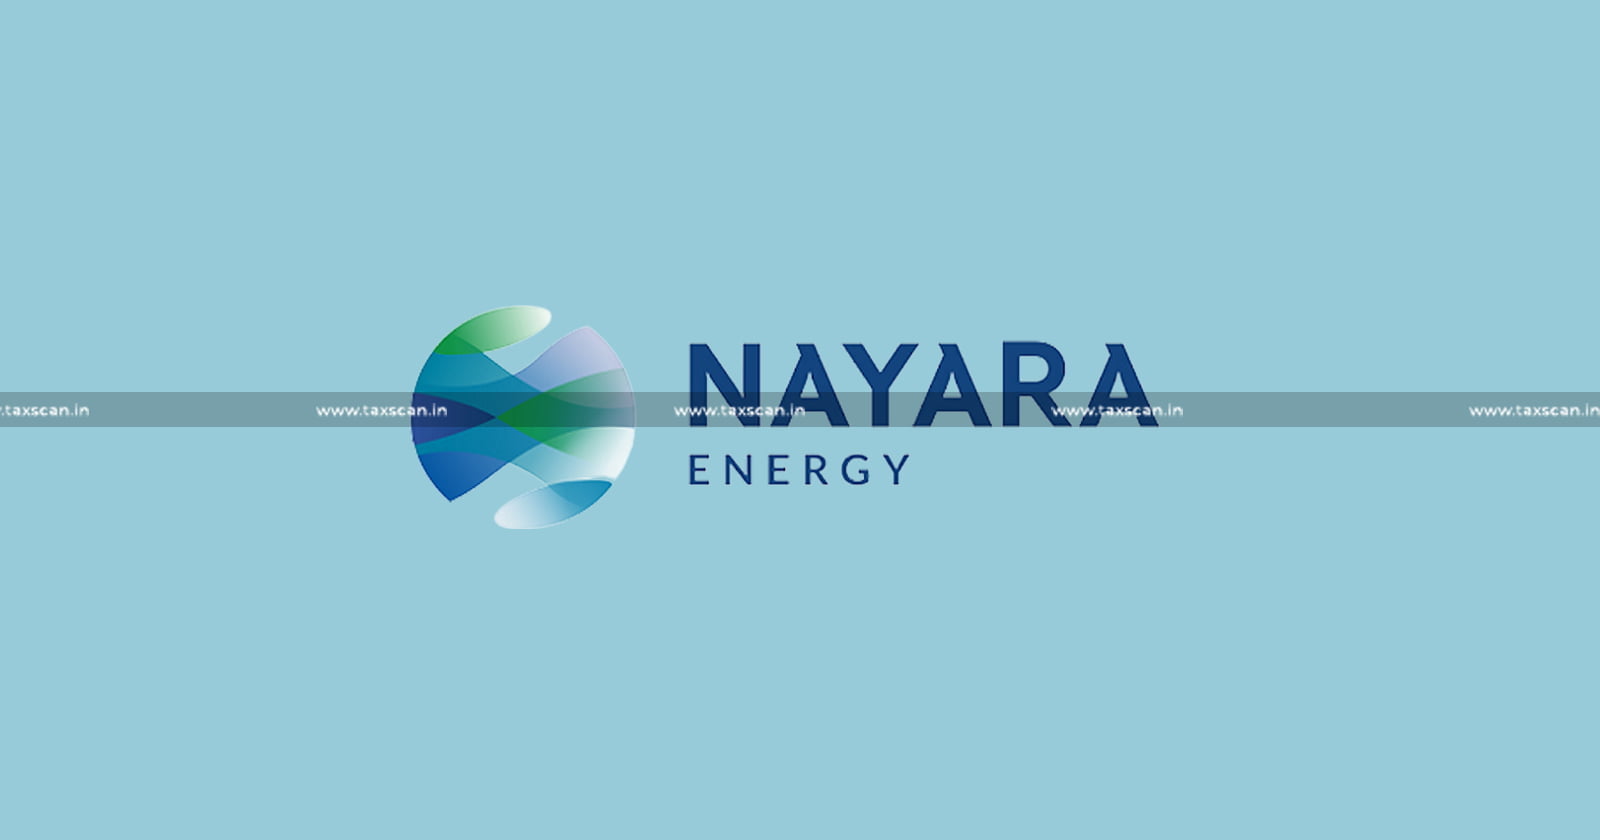 Nayara Energy - Duty on Goods - loss of Goods - Goods - Loading of Goods - unloading of Goods - CESTAT - Customs - Excise - Service Tax - Taxscan